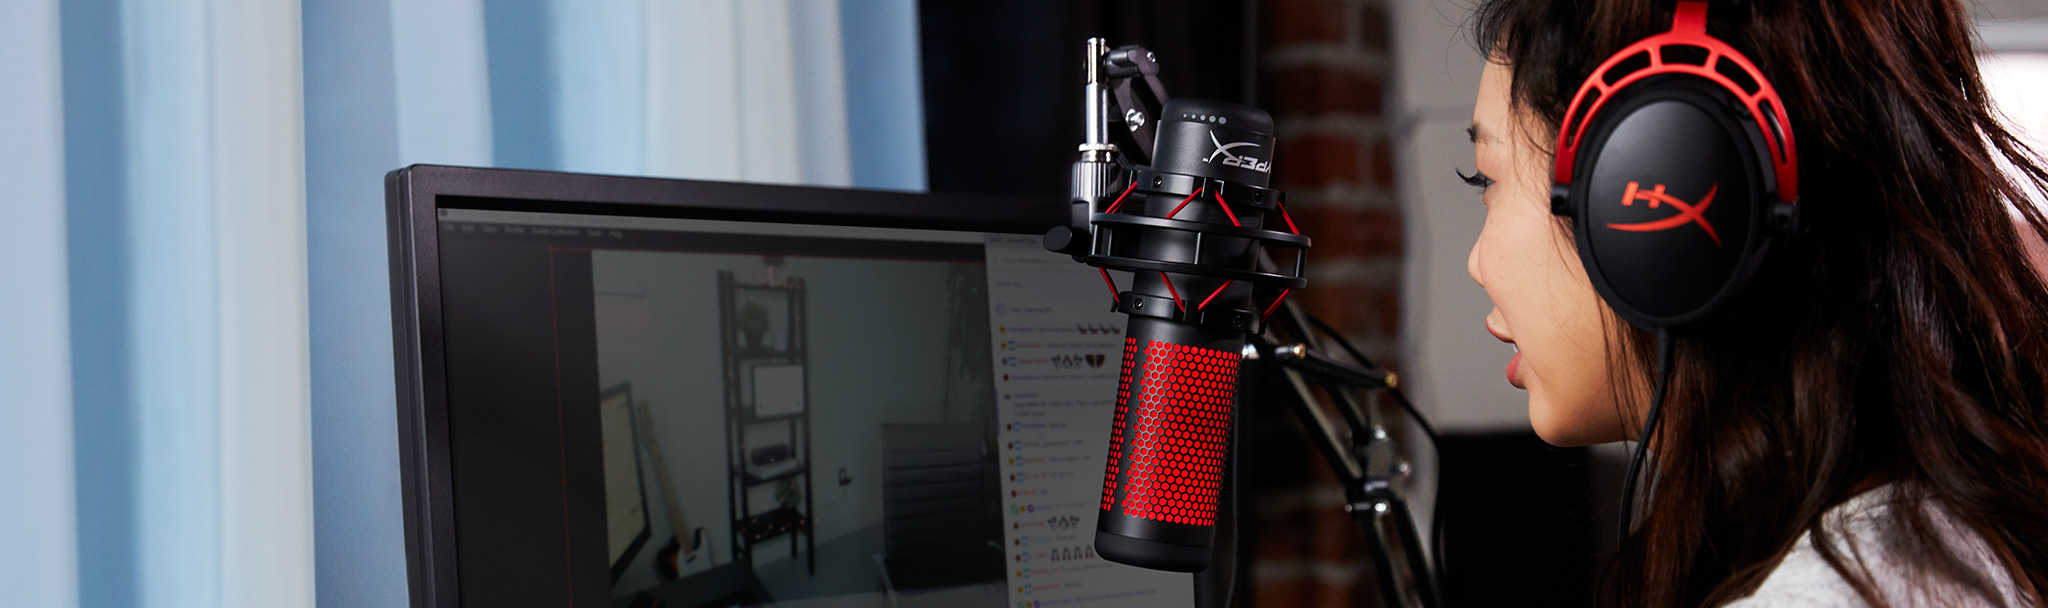 Hyperx Quadcast Usb Condenser Gaming Microphone Review Mkau Gaming